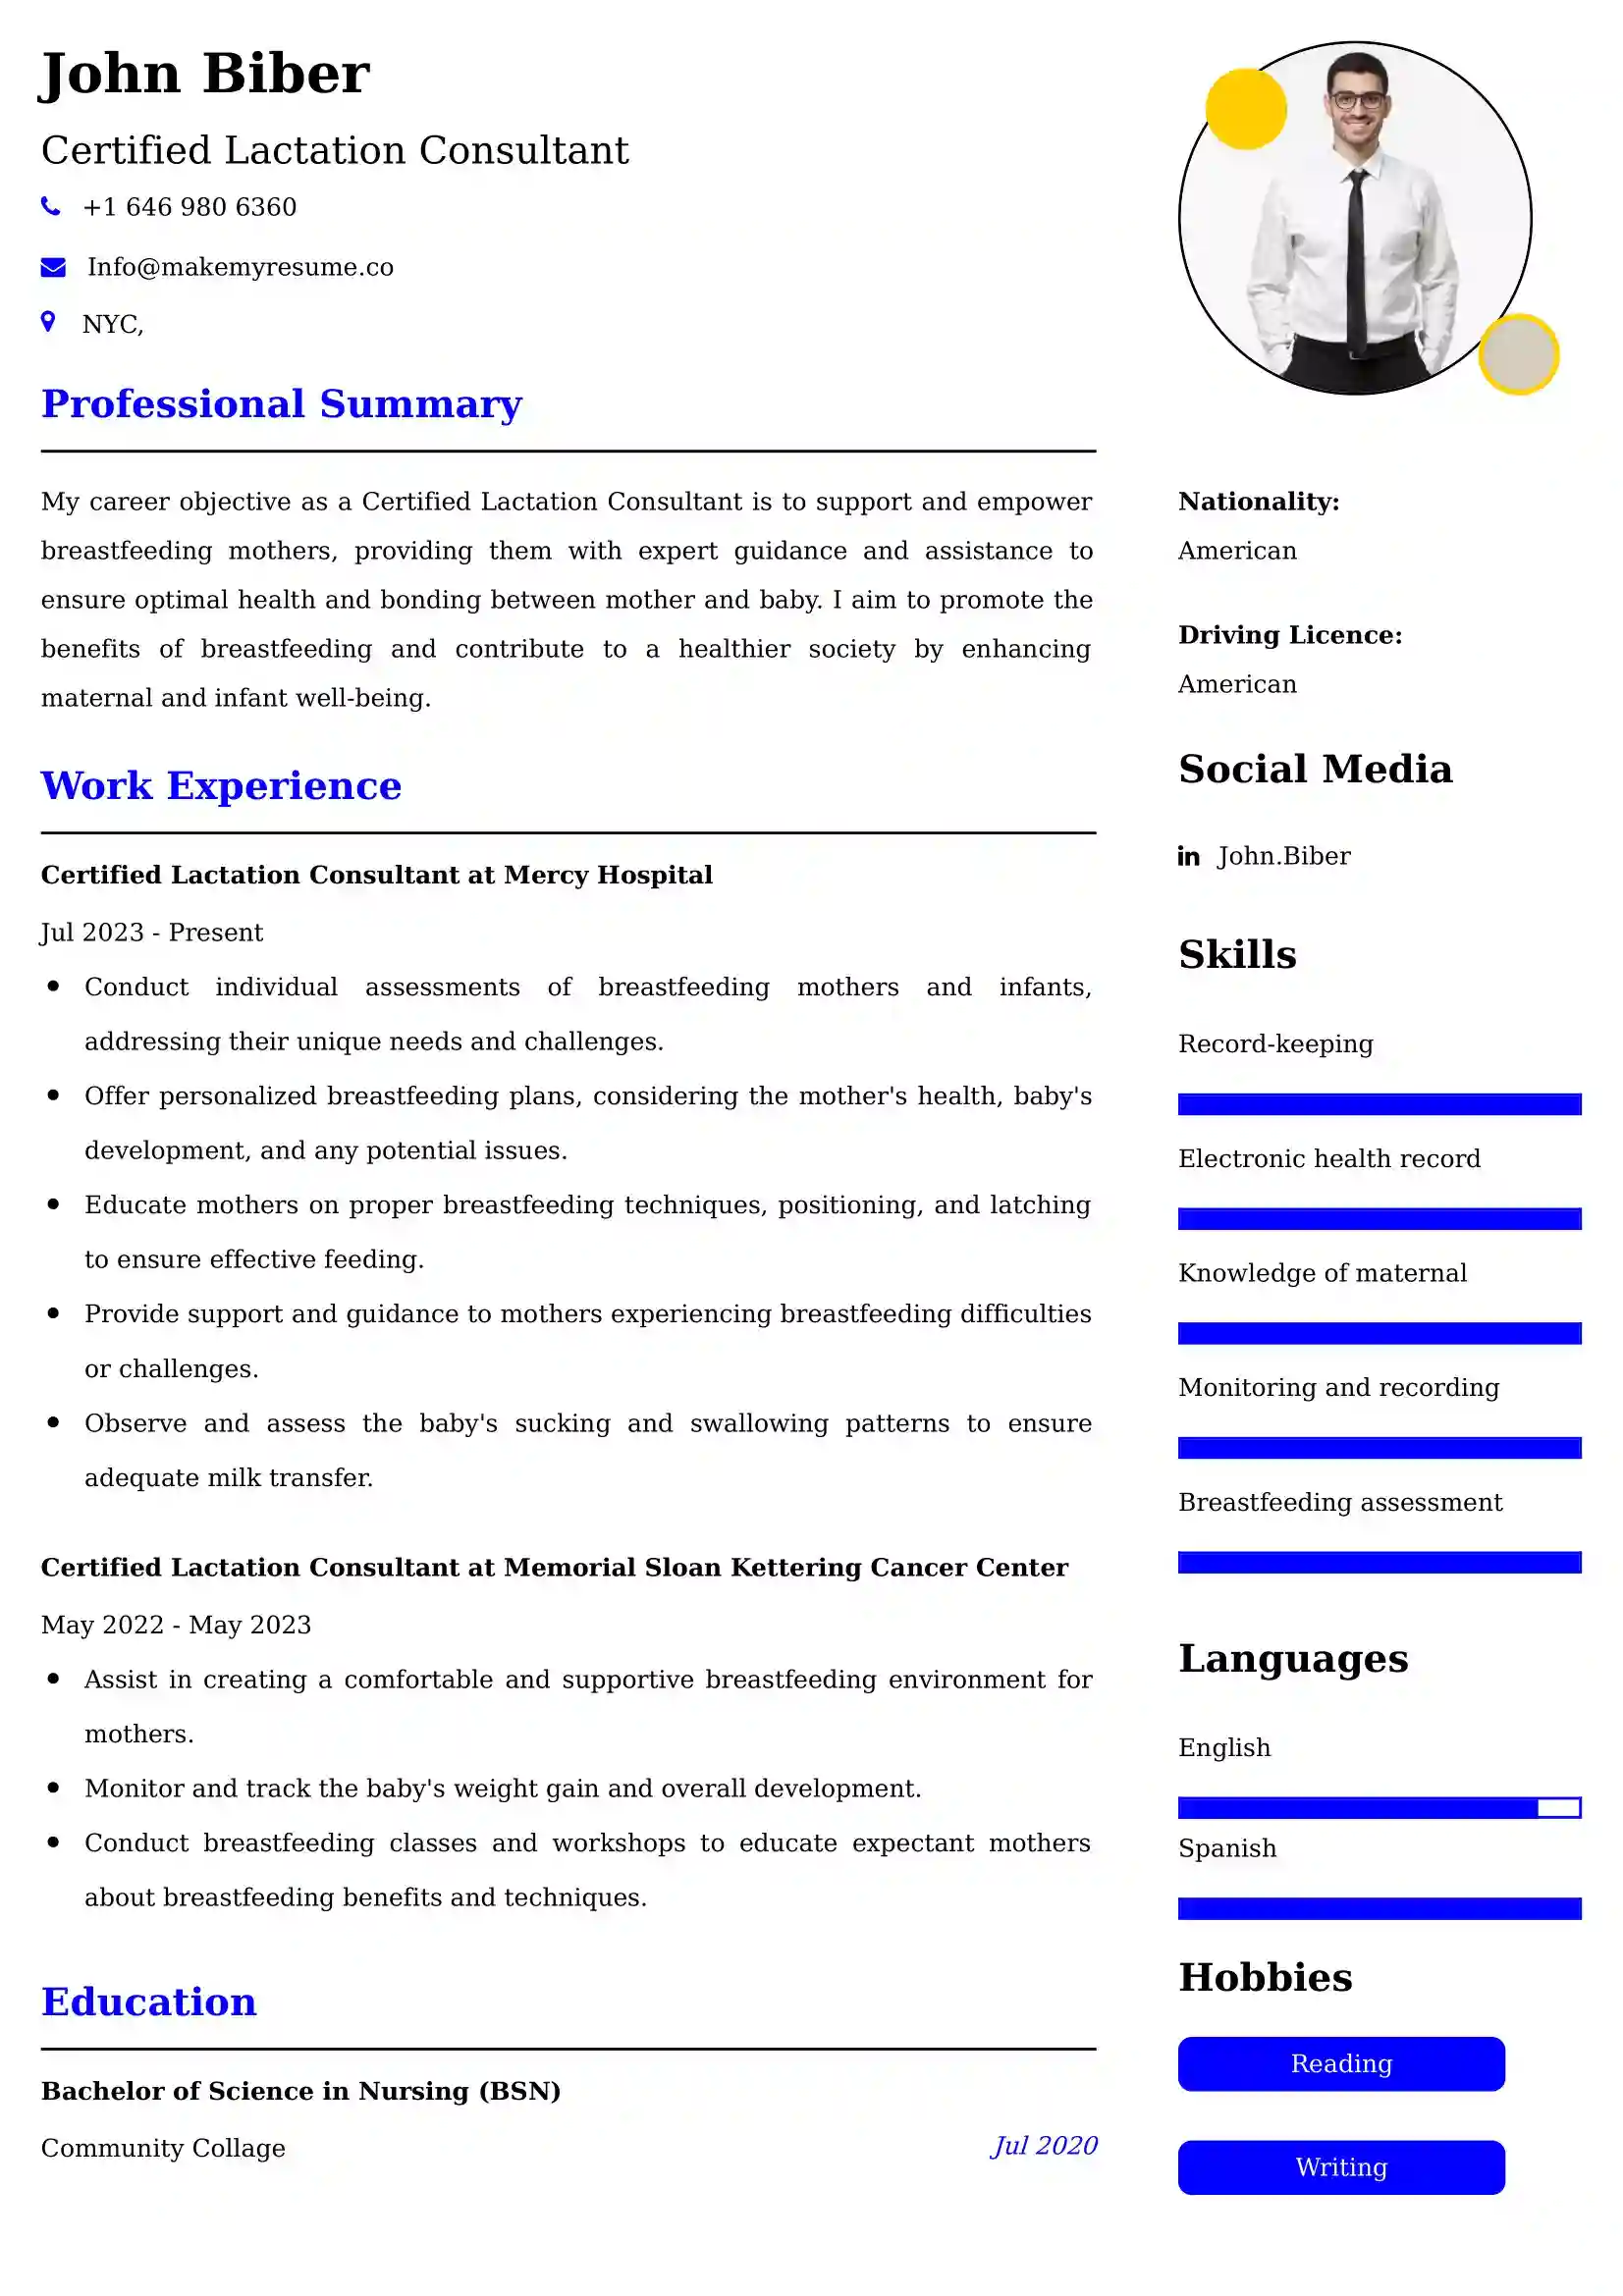 Certified Lactation Consultant Resume Examples - Brazilian Format, Latest Template